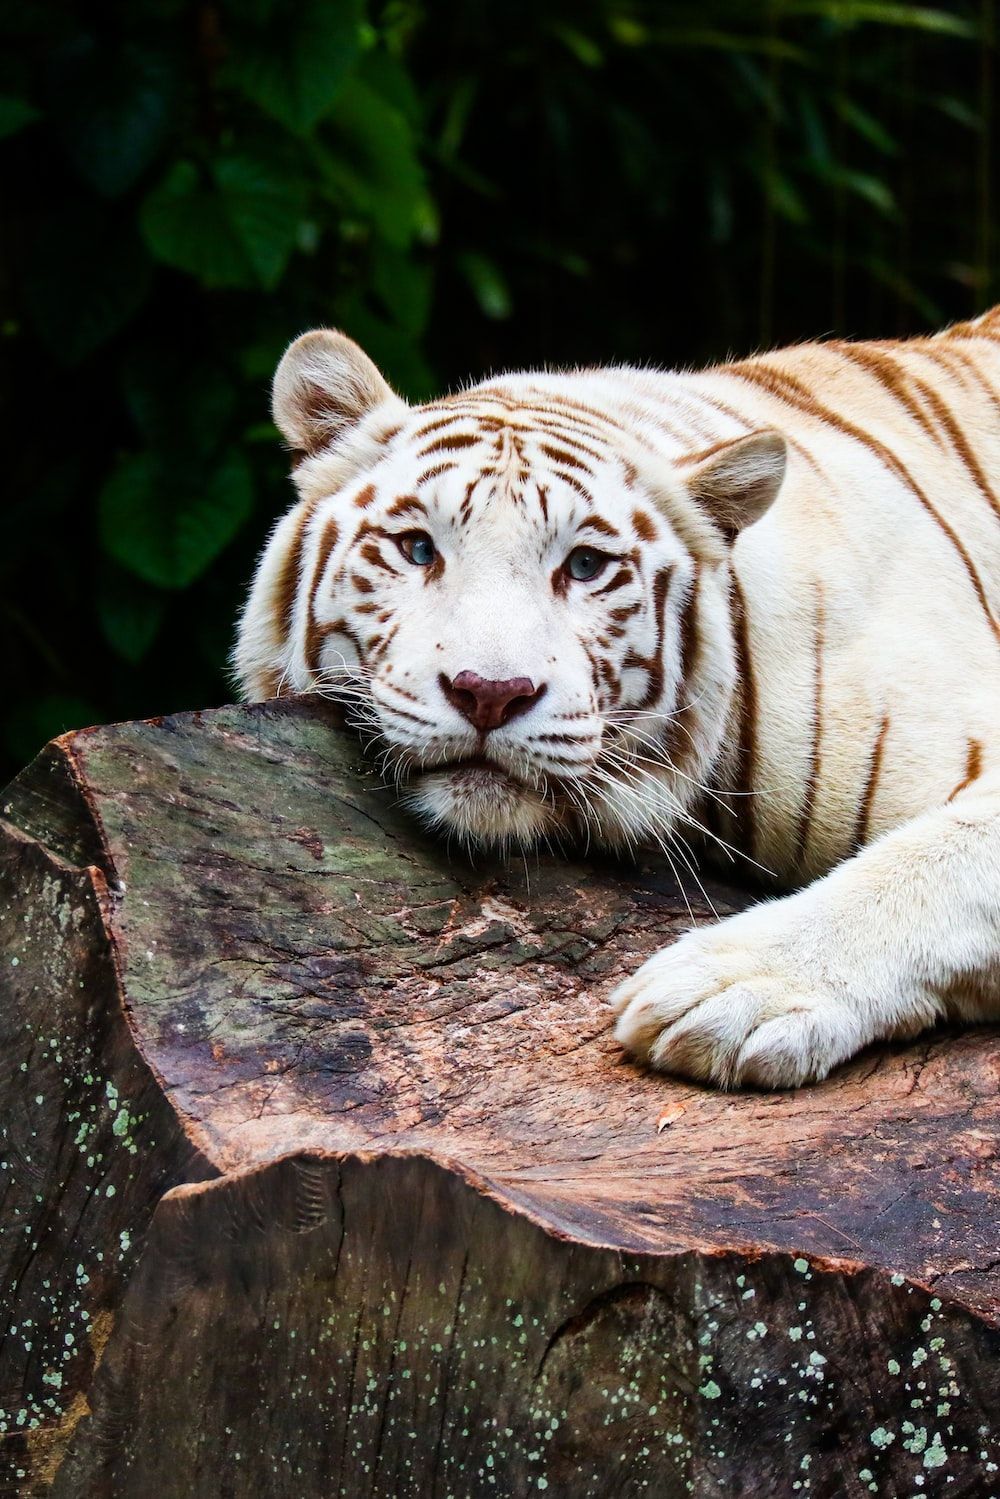 A white tiger picture of a white tiger on a tree stump. - Tiger